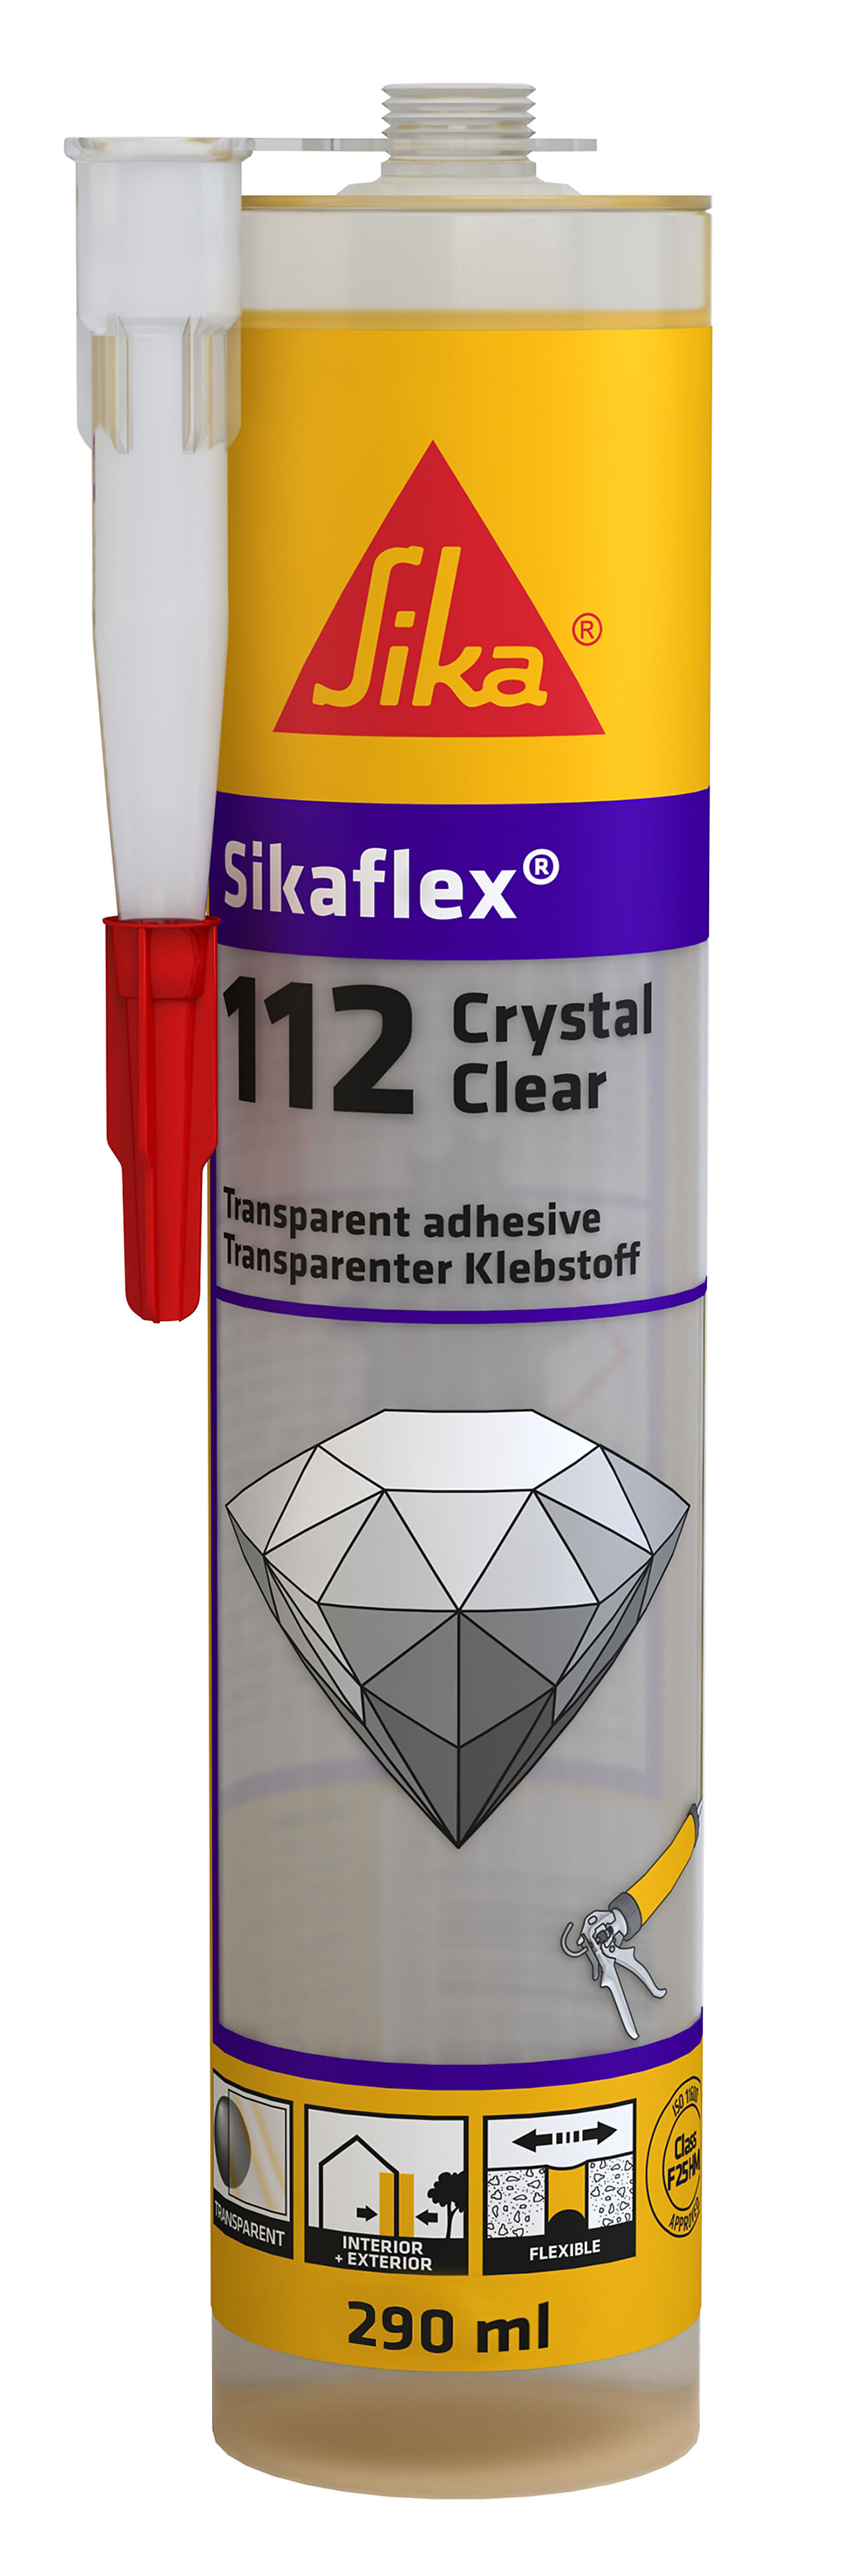 Sika Sika Norge Sikaflex-112 cryst. clear 290 ml 1